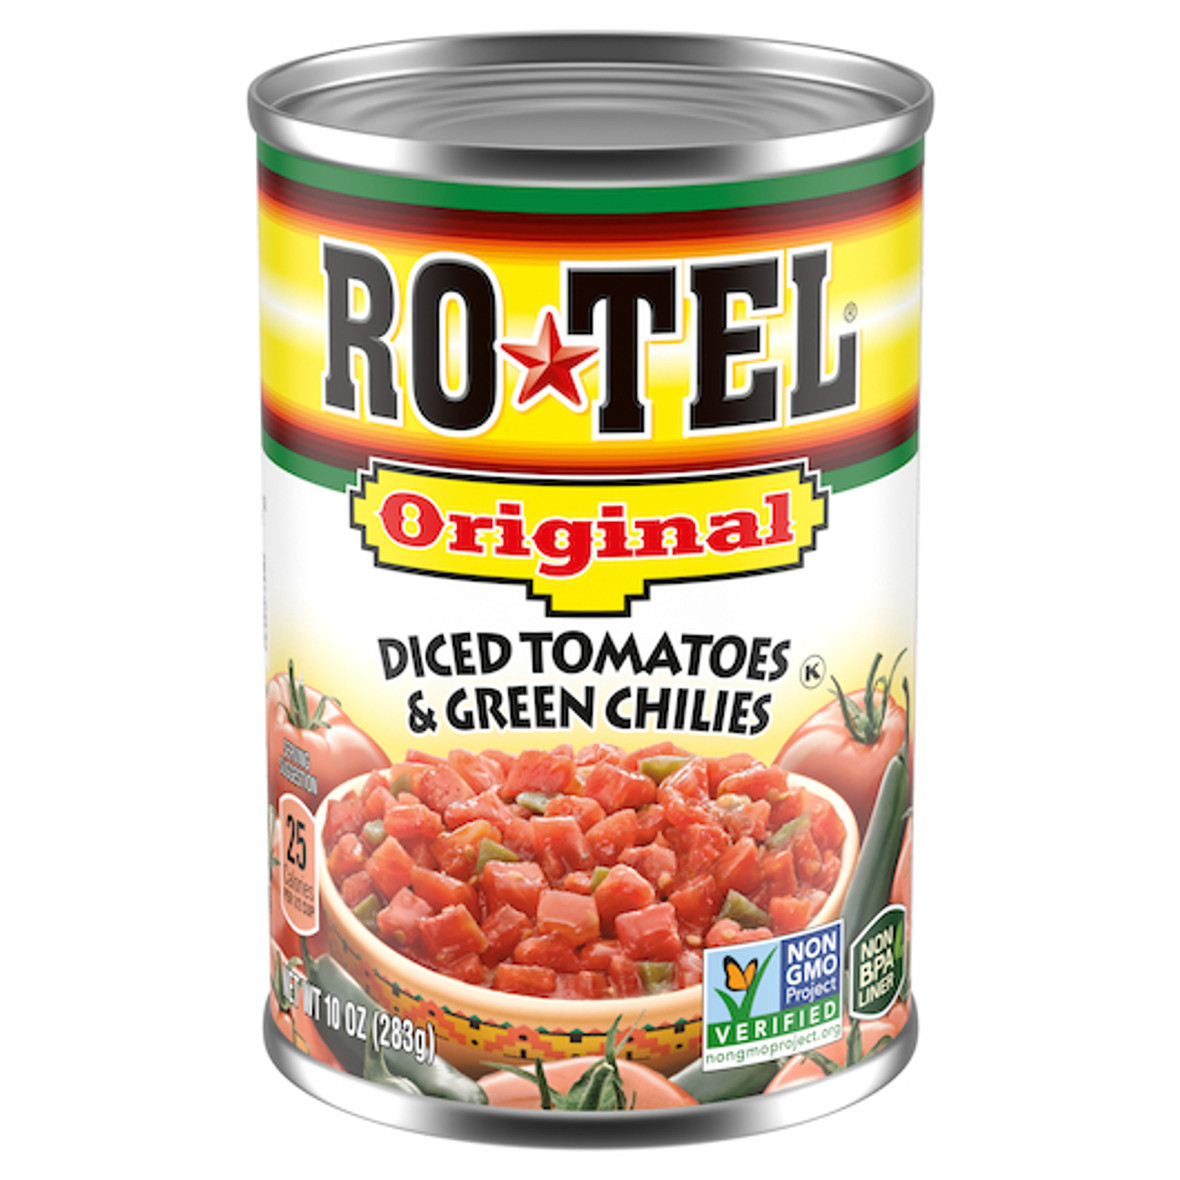 Ro Tel Original Diced Tomatoes And Green Chilies, 10 Ounce, 24 Per Case